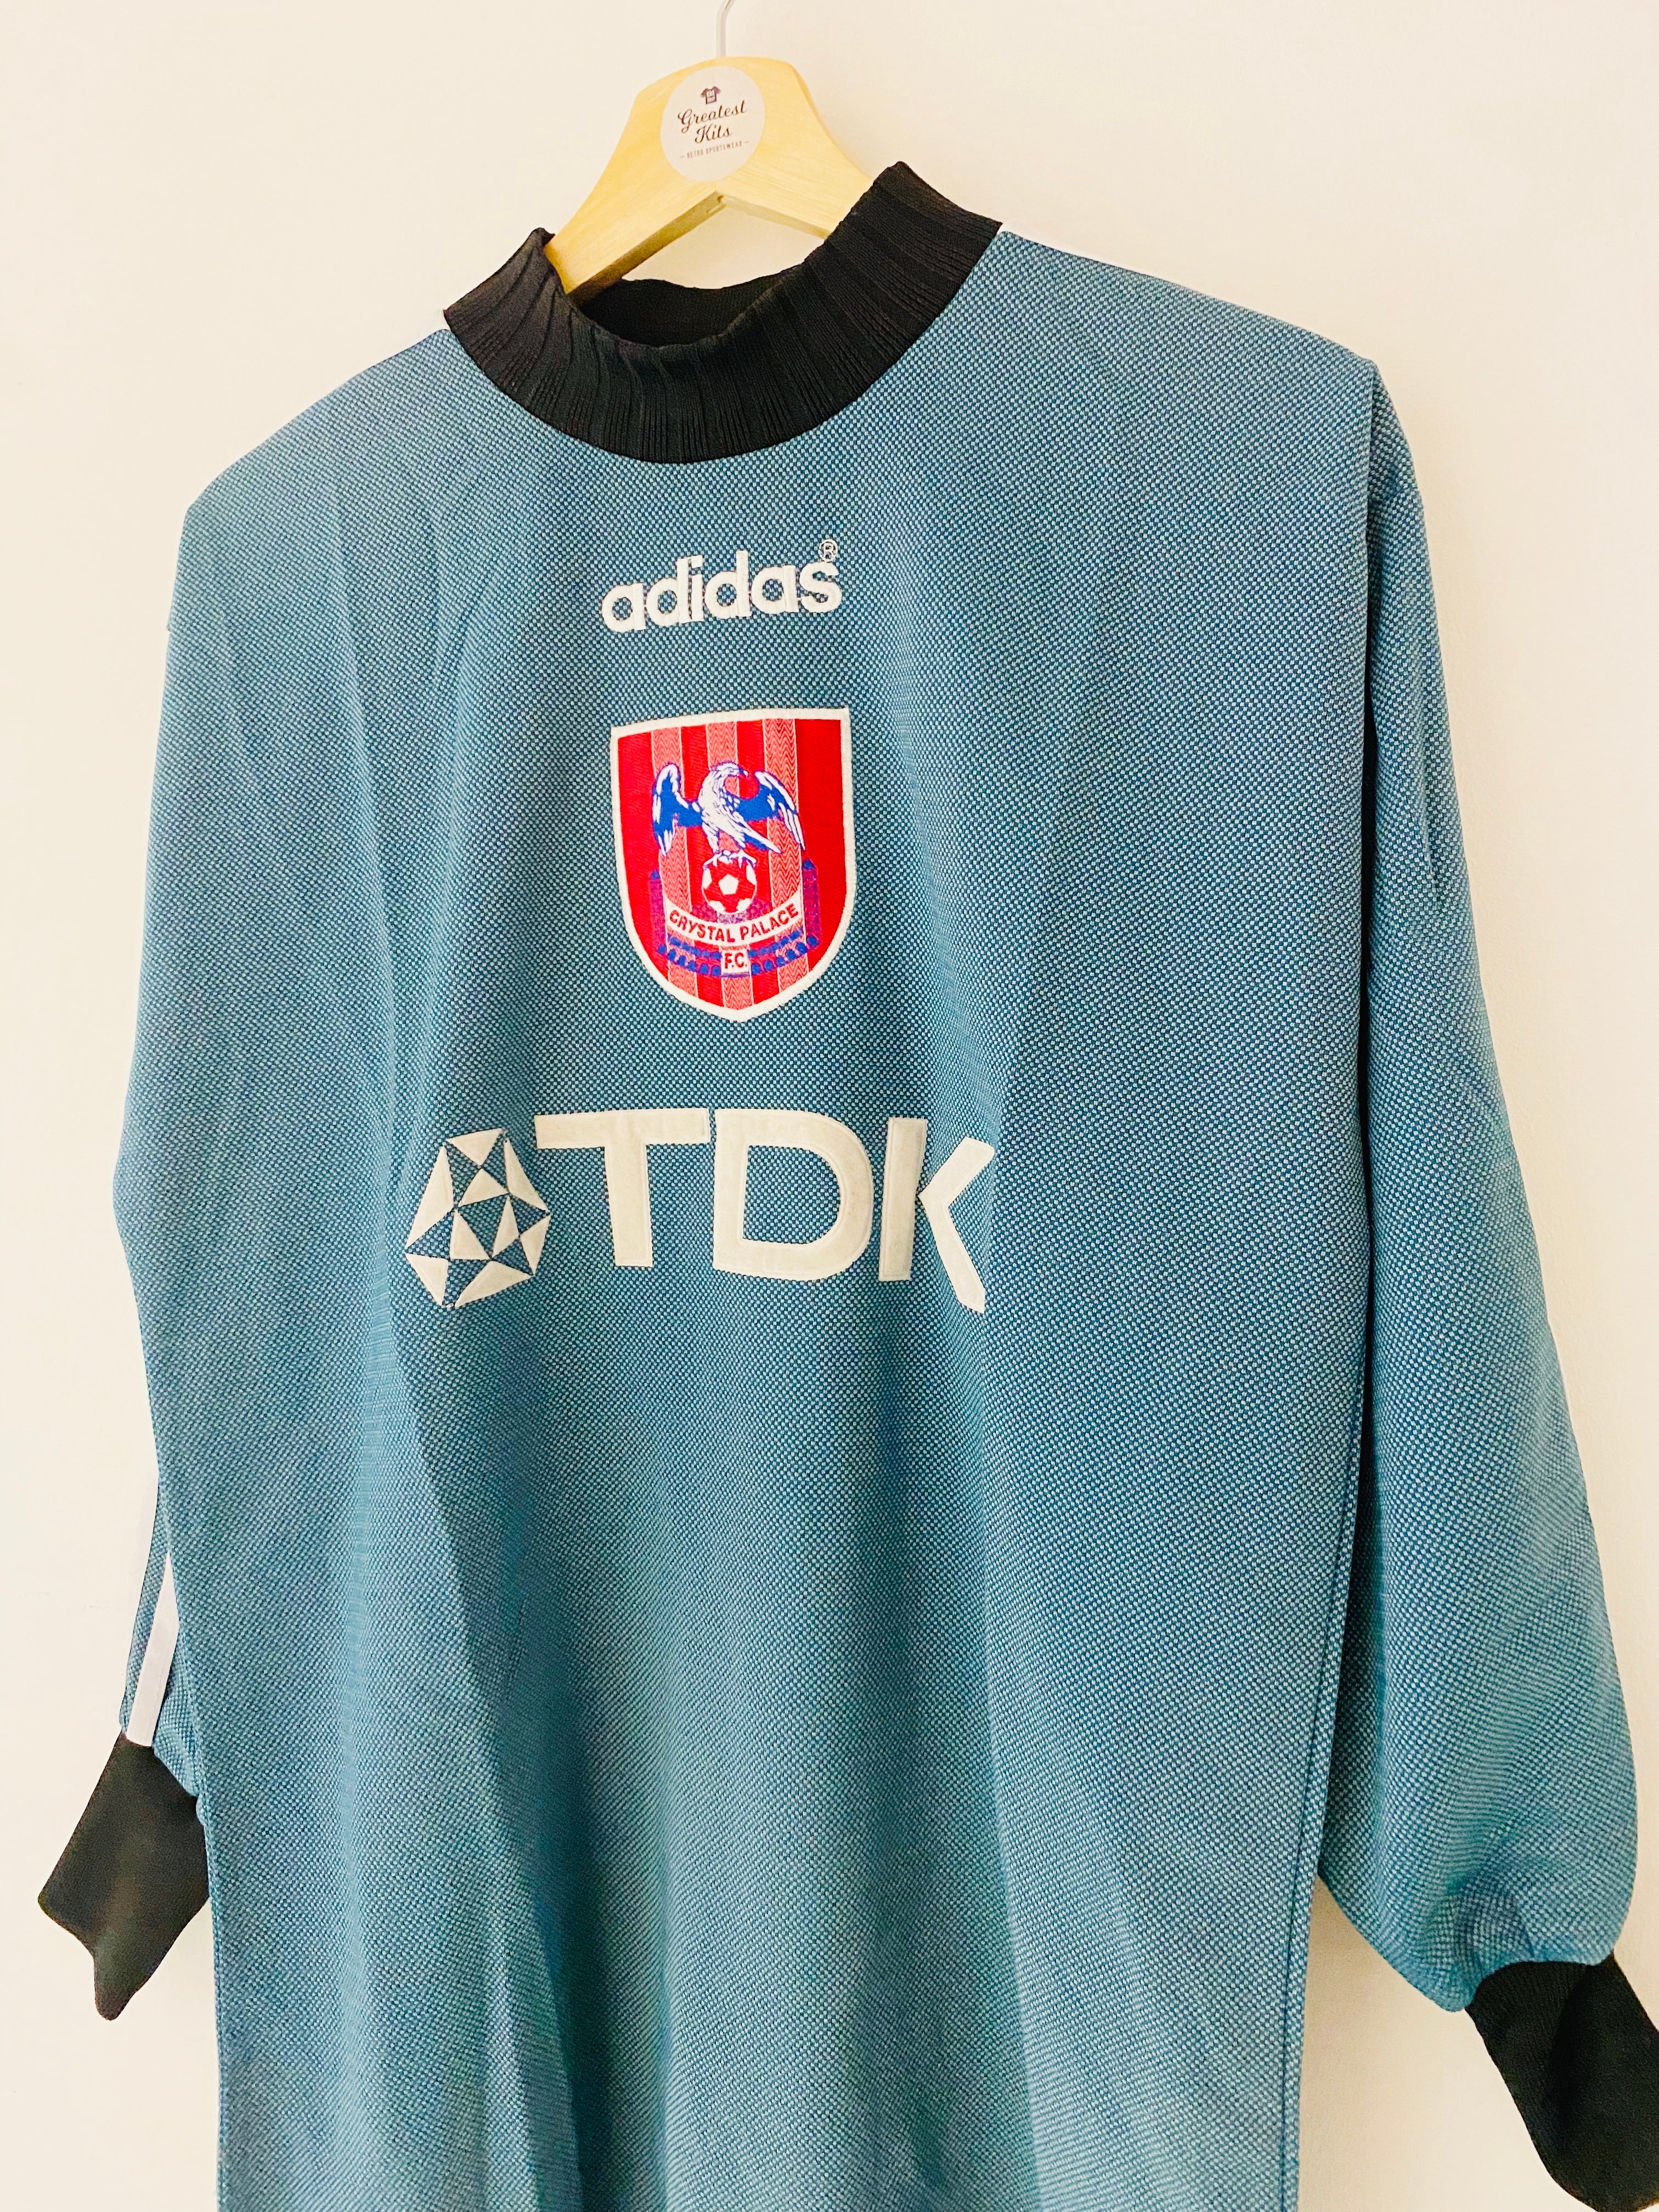 1996/97 Crystal Palace GK Jour du maillot #1 (S) 8.5/10